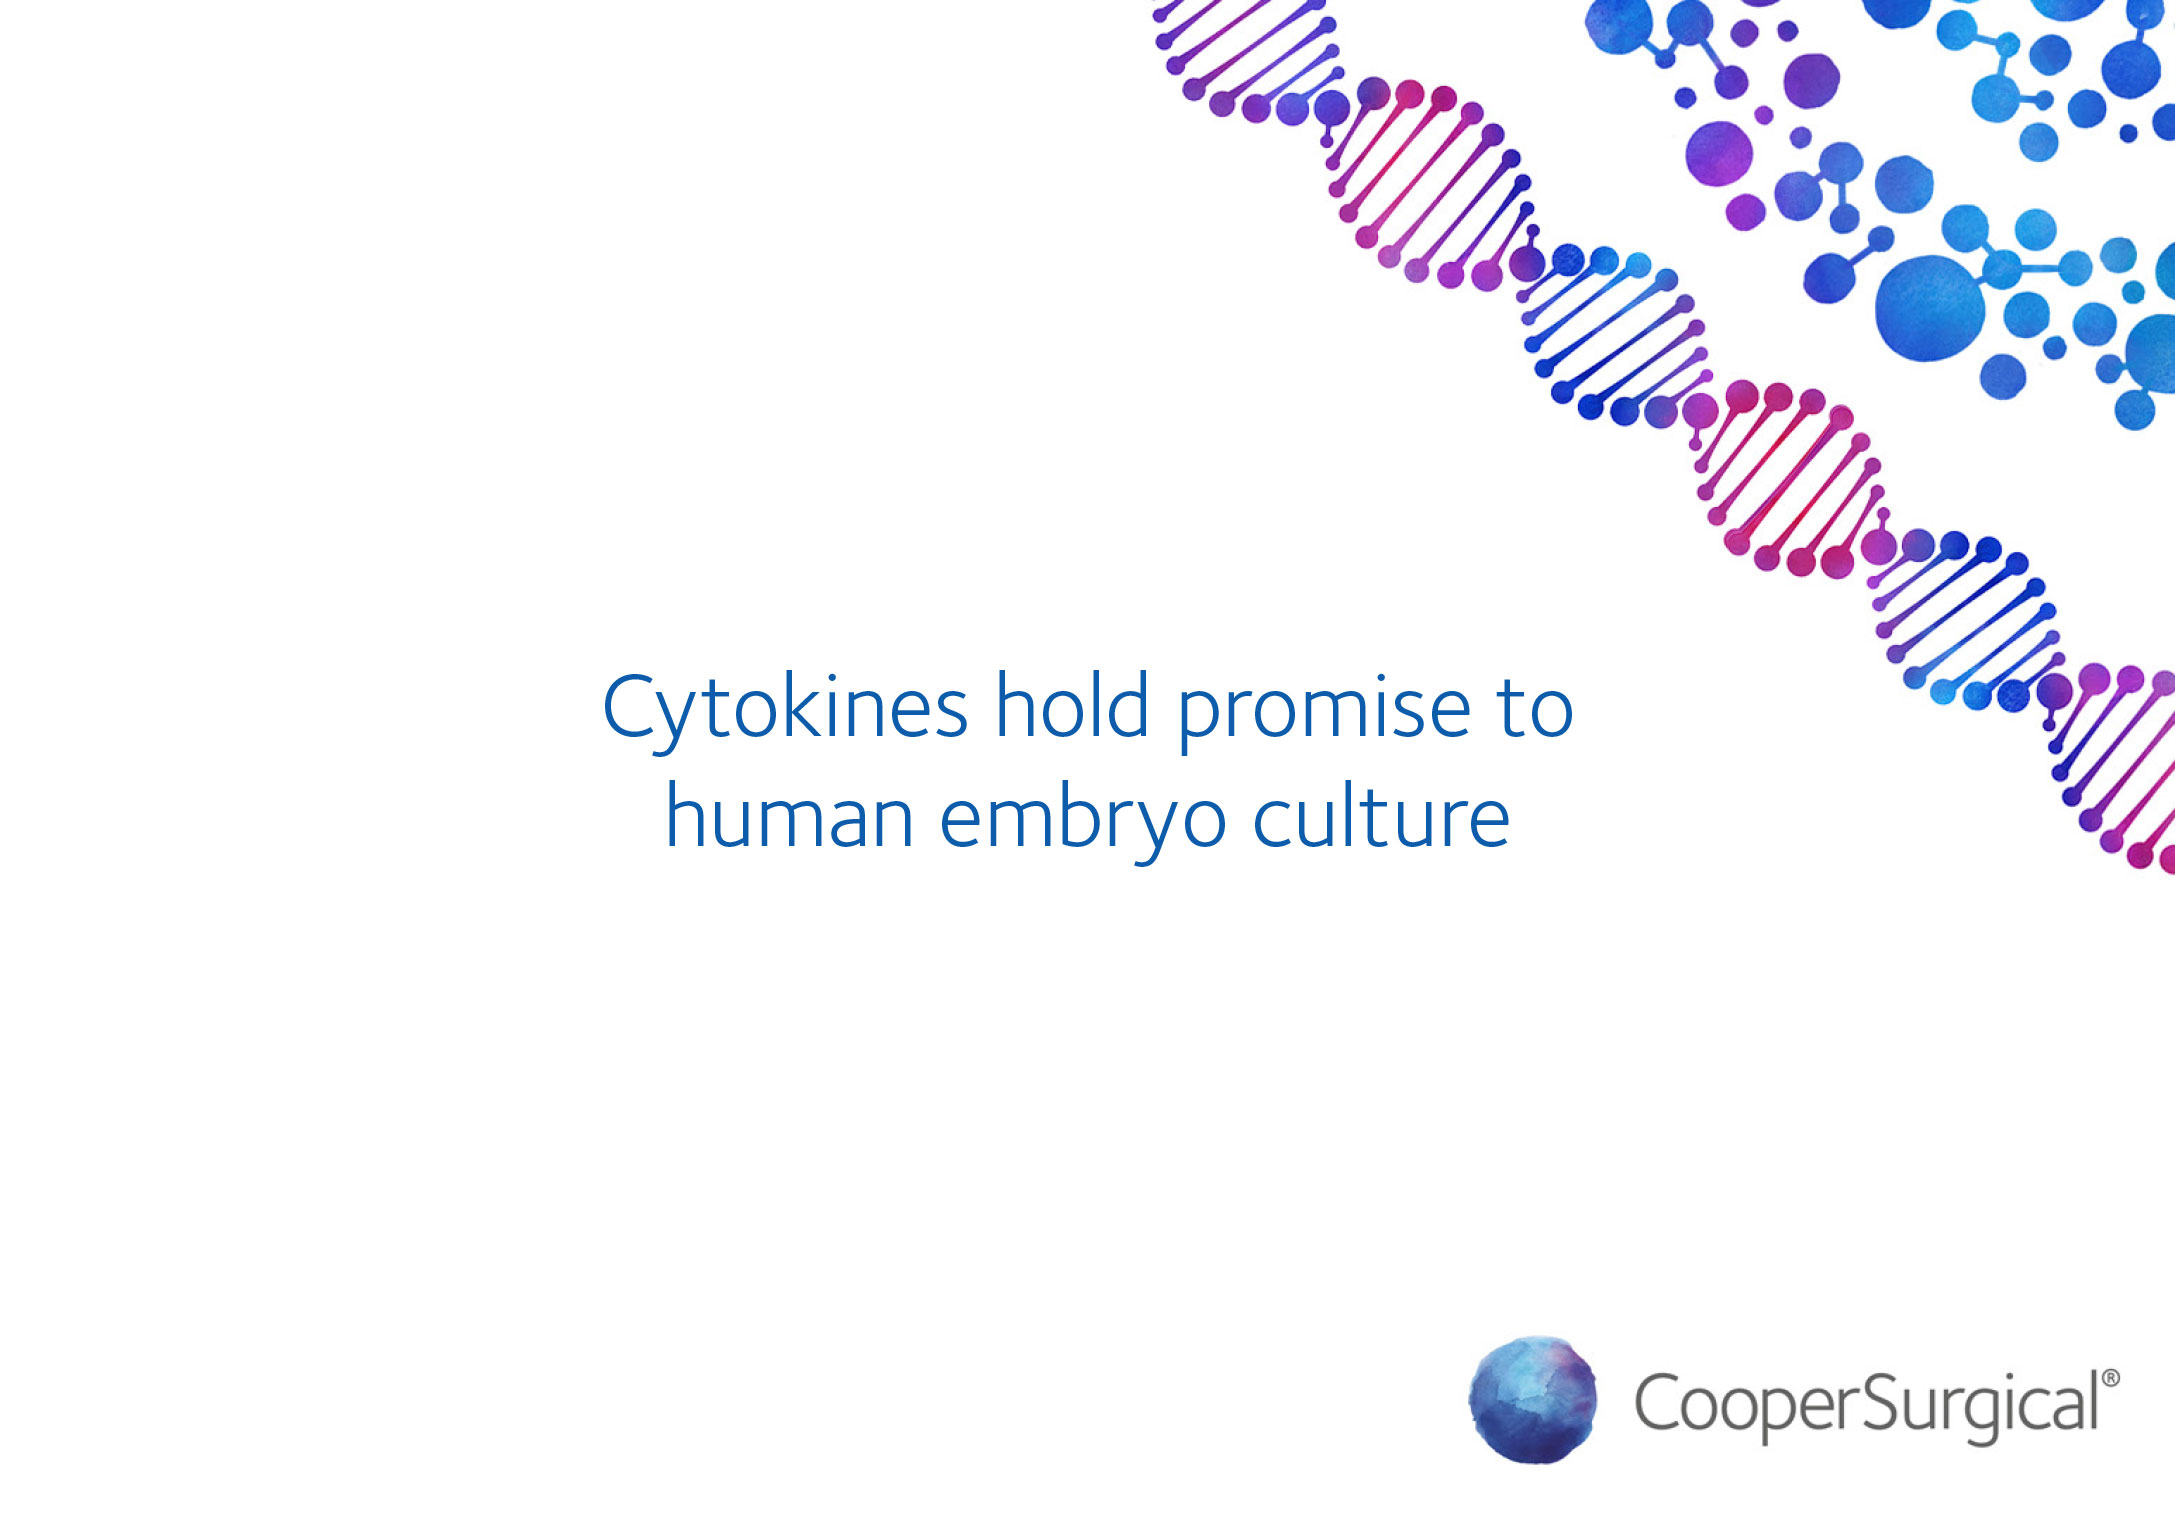 Cytokines hold promise to human embryo culture